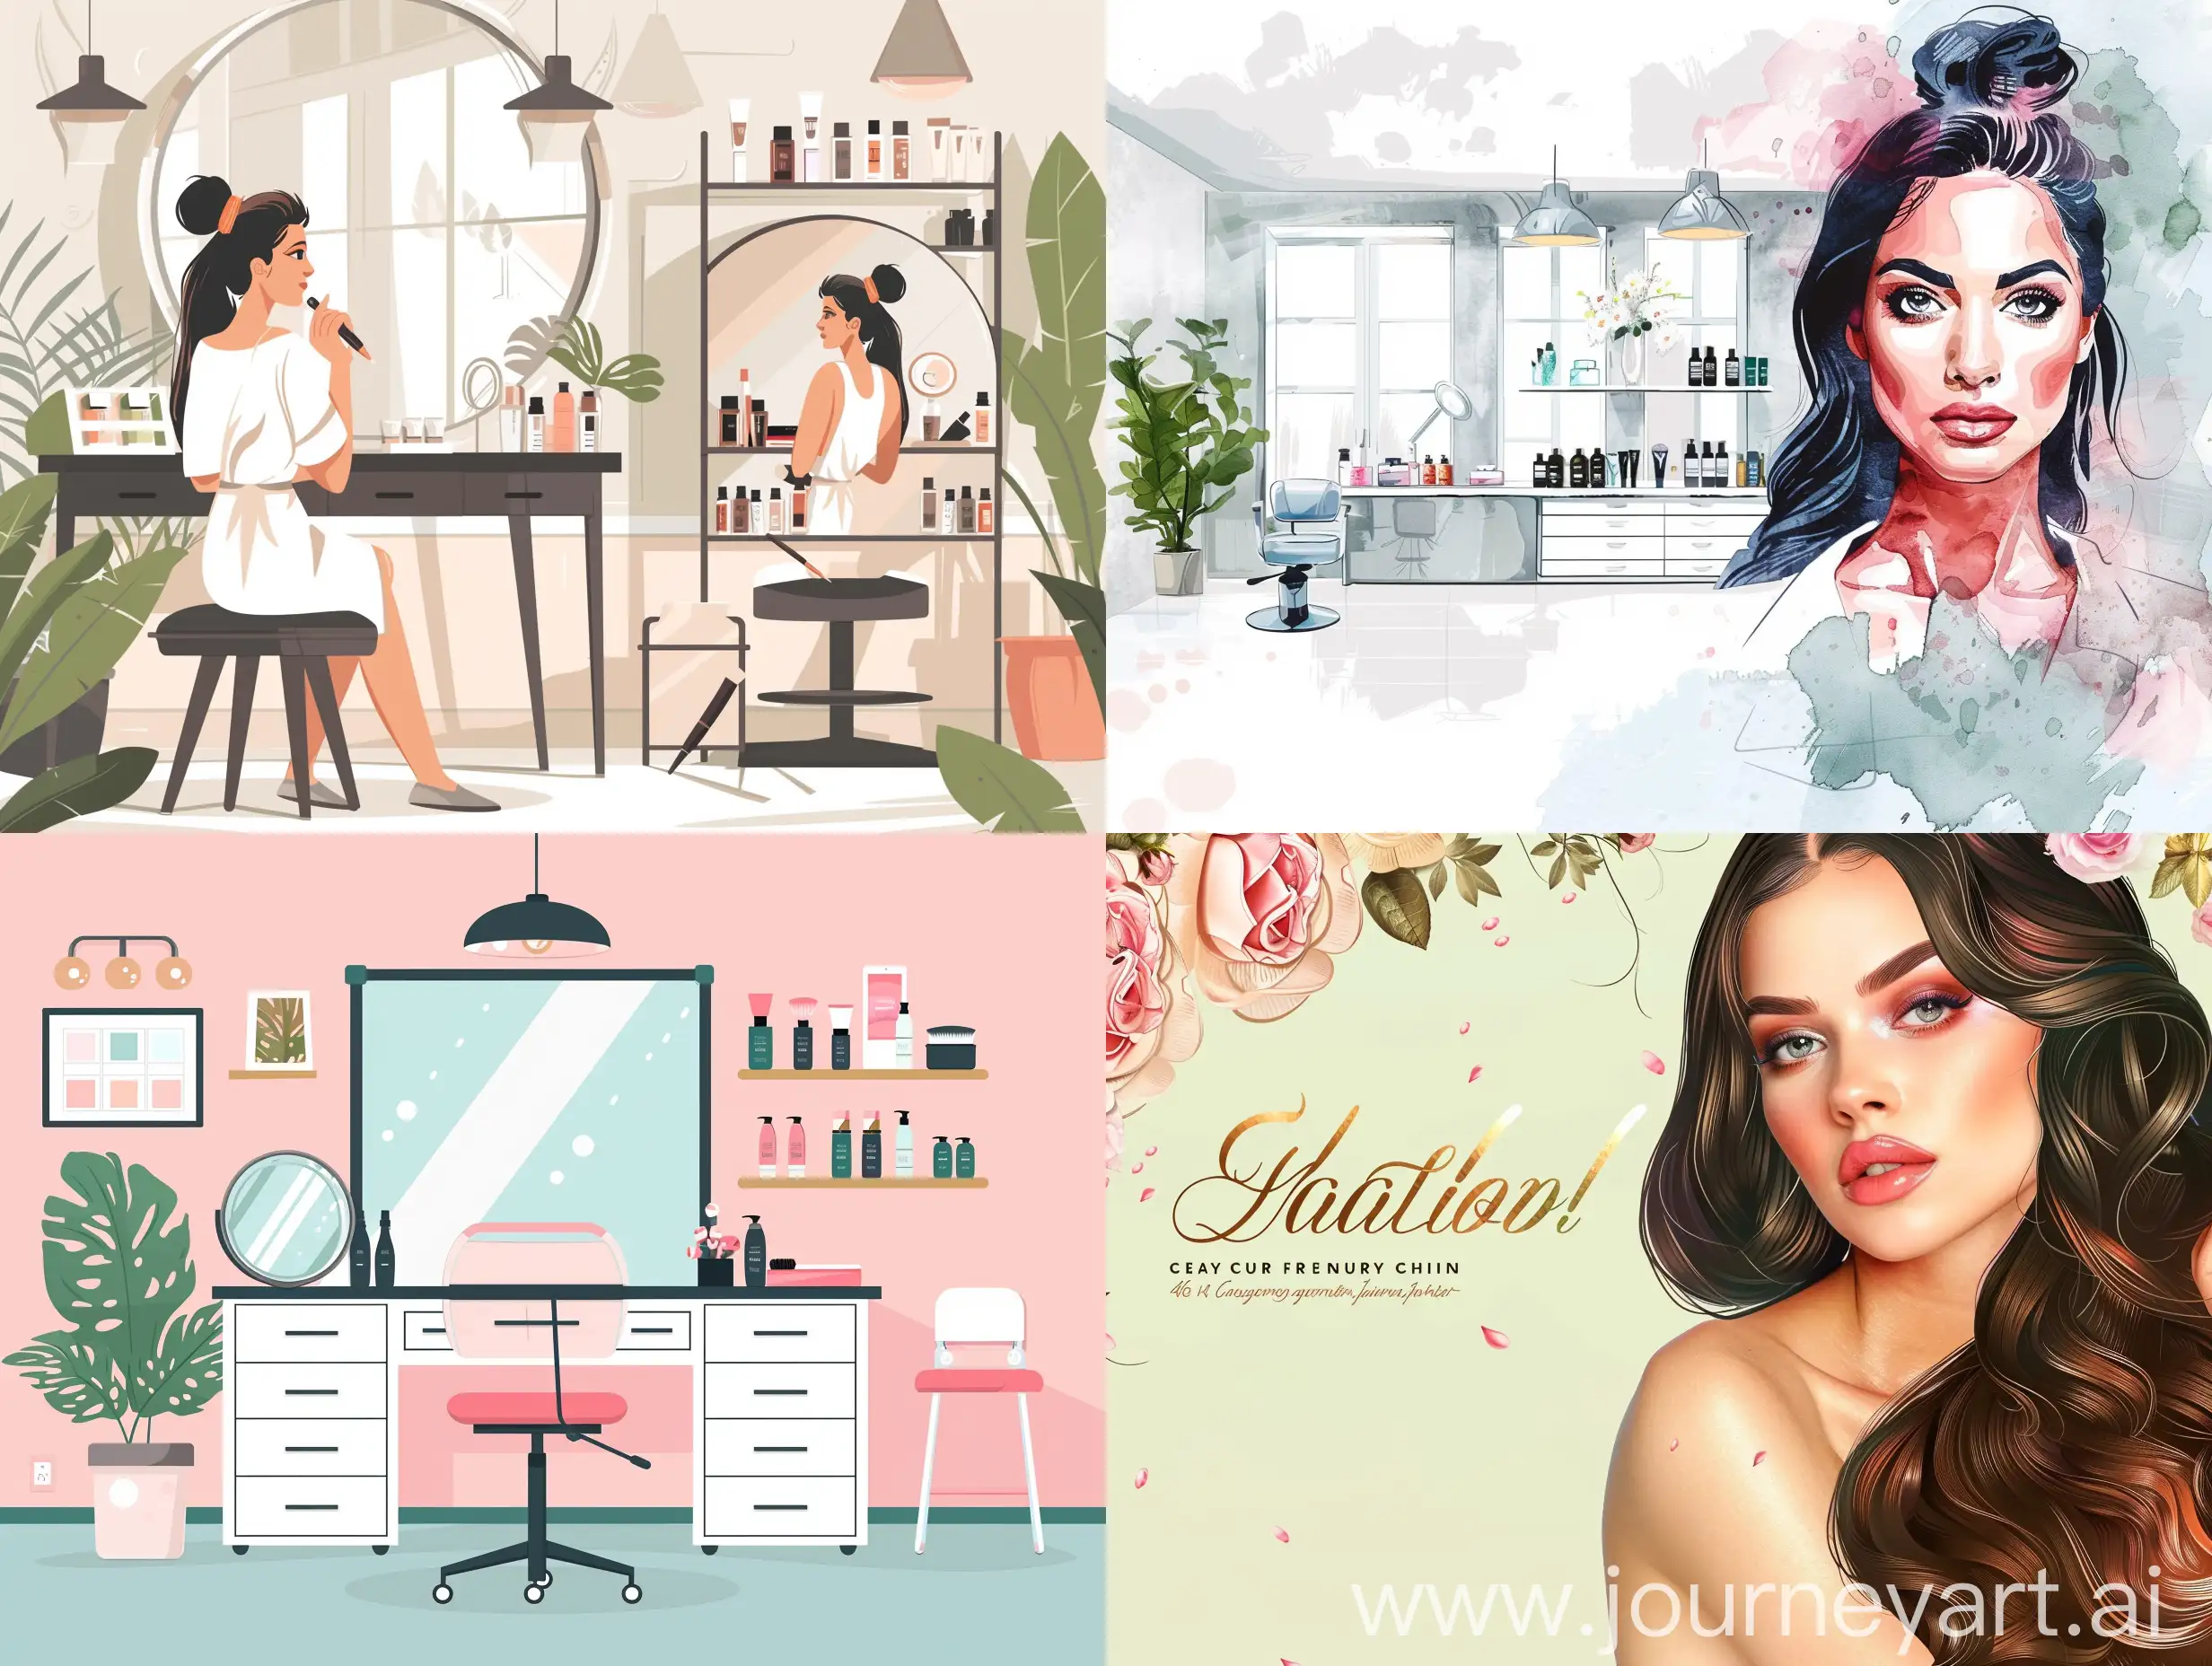 design a professional and modern web banner, Google ad or display ad for a beauty salon